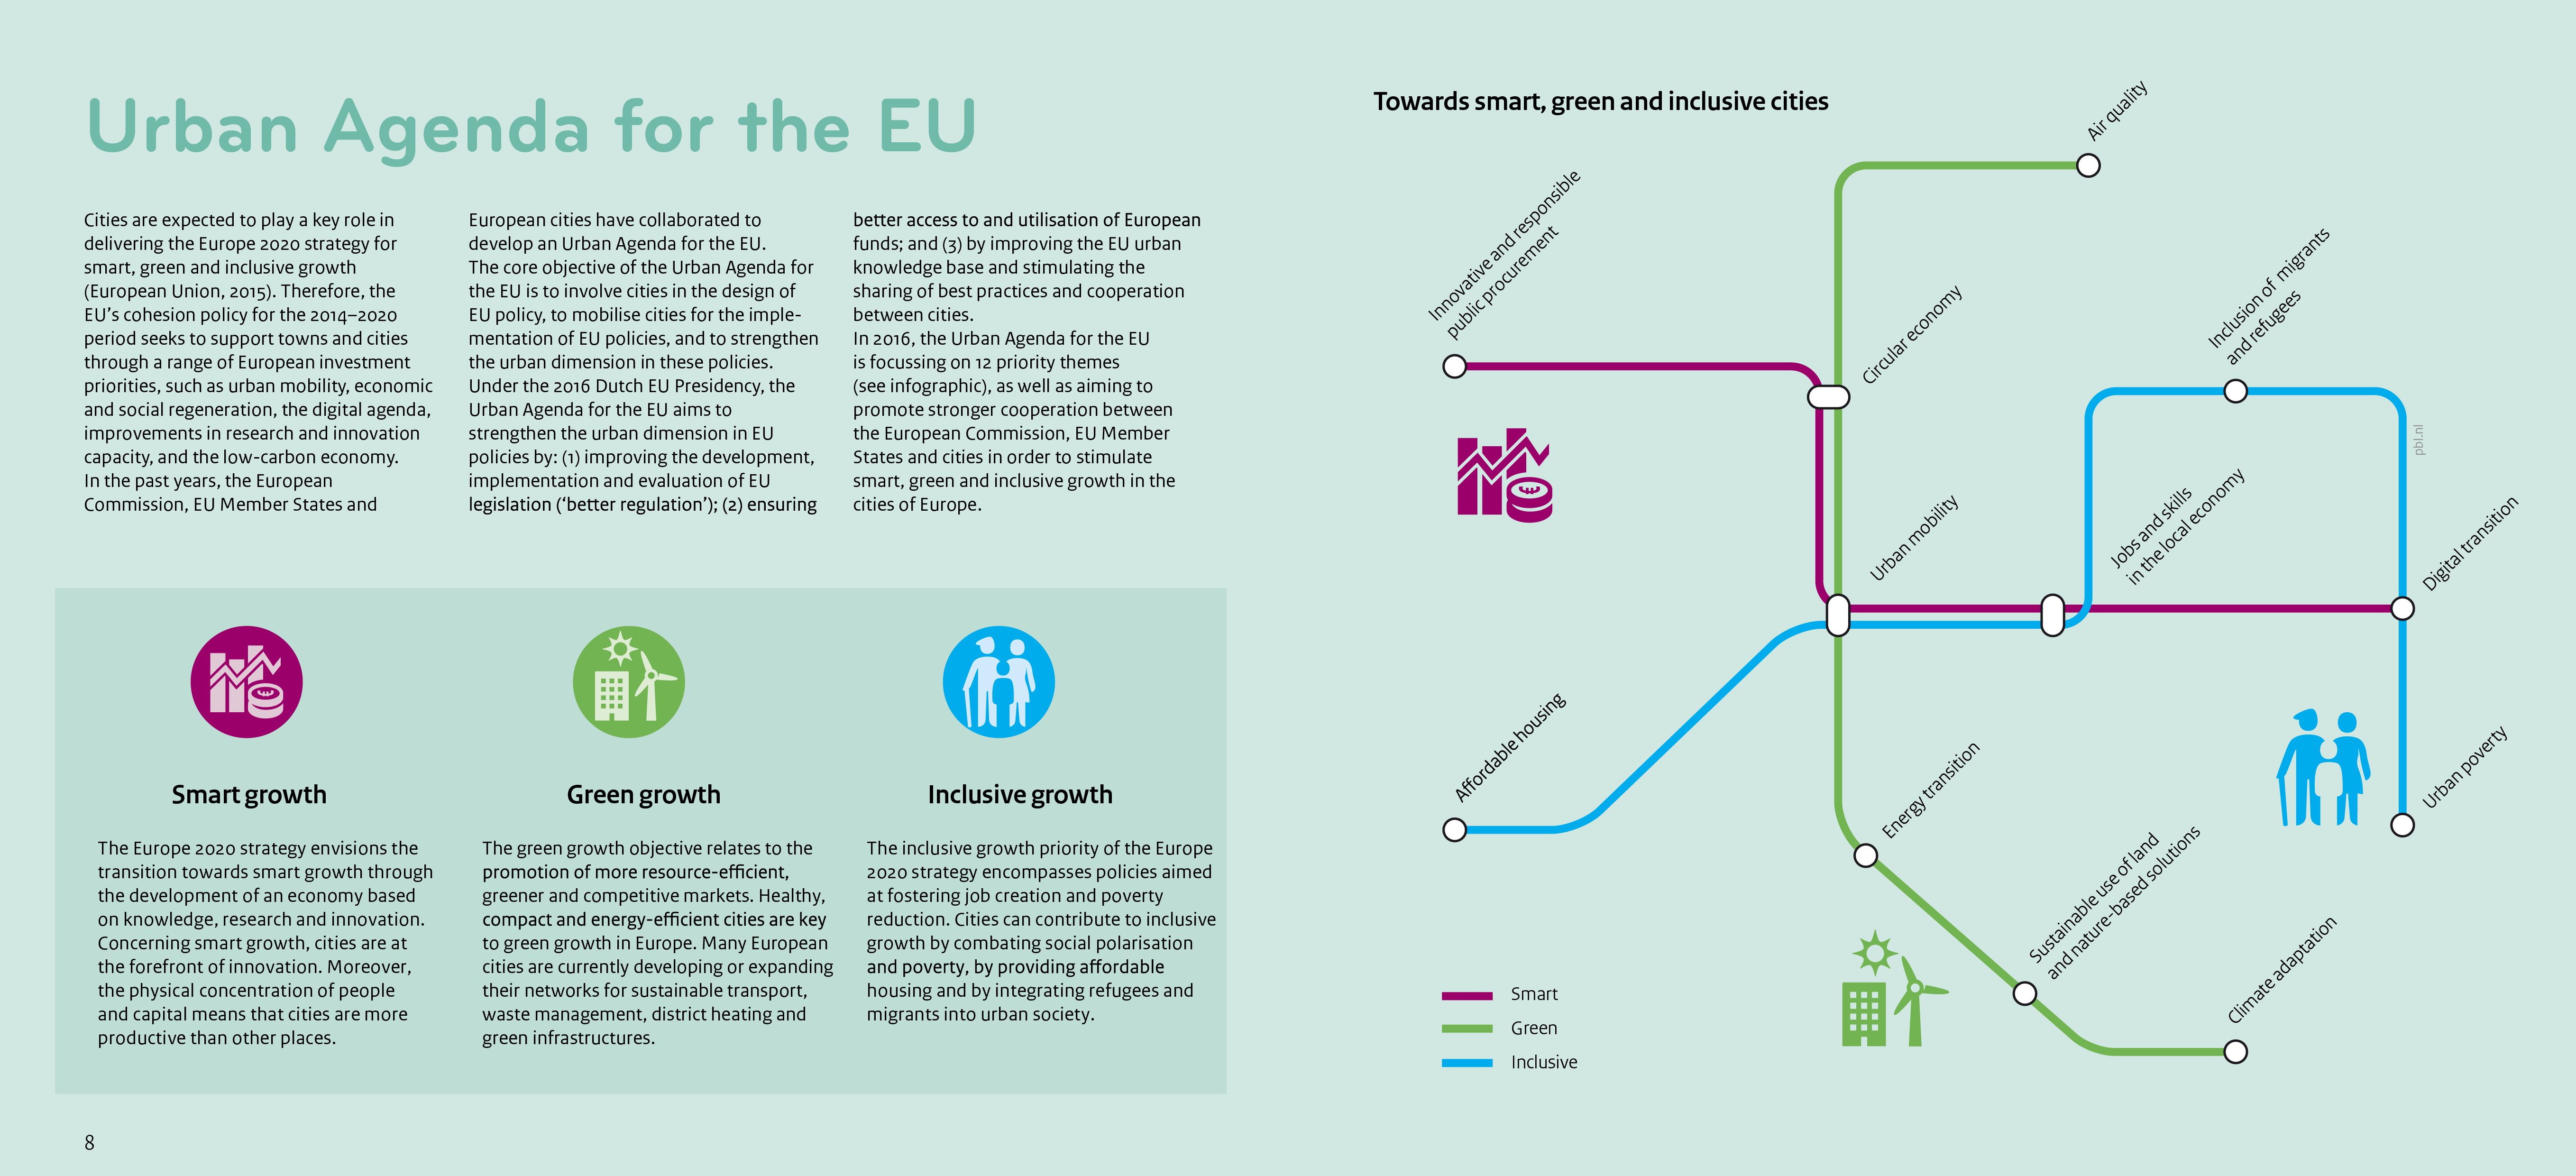 This infographic explains the main objectives and shows 12 priority themes of the Urban Agenda for the EU.